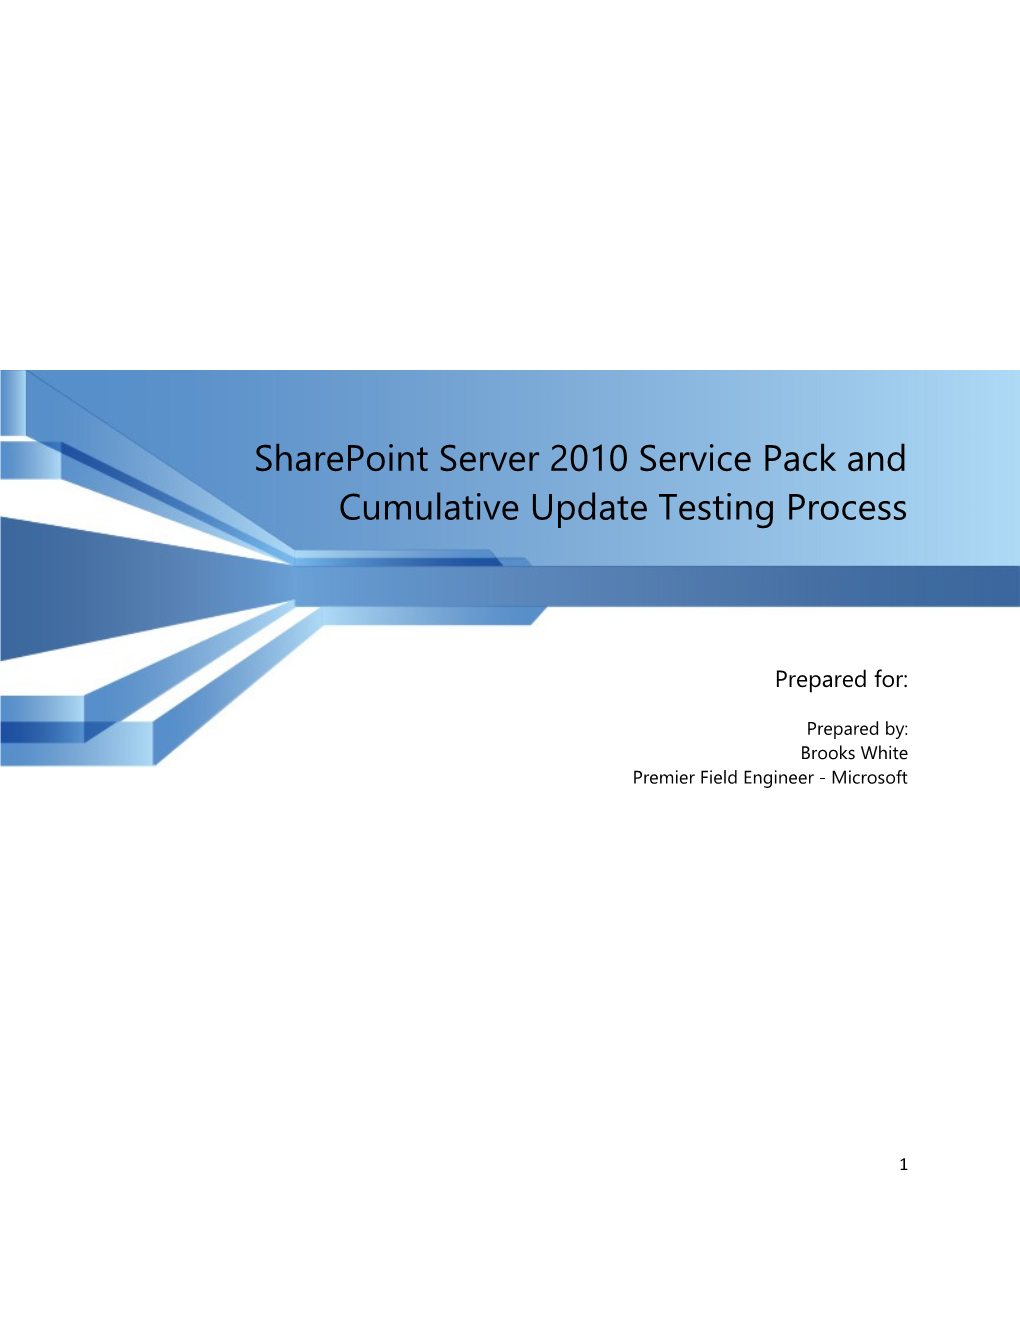 Sharepoint Server 2010 Service Pack and Cumulative Update Testing Process